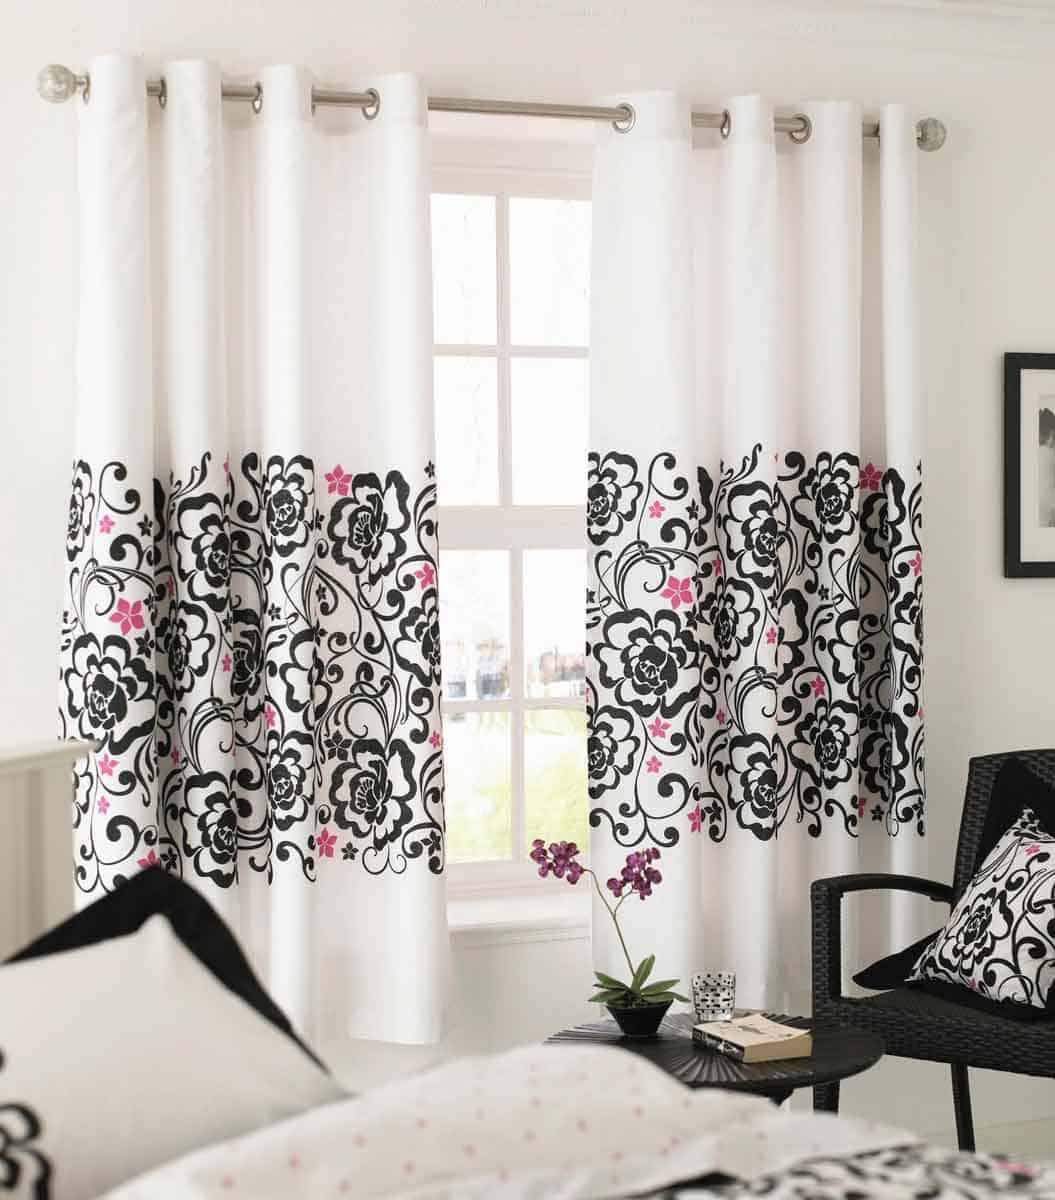 4 Ways To Choose The Right Curtain For Your Living Room SingaporeCurtainscom